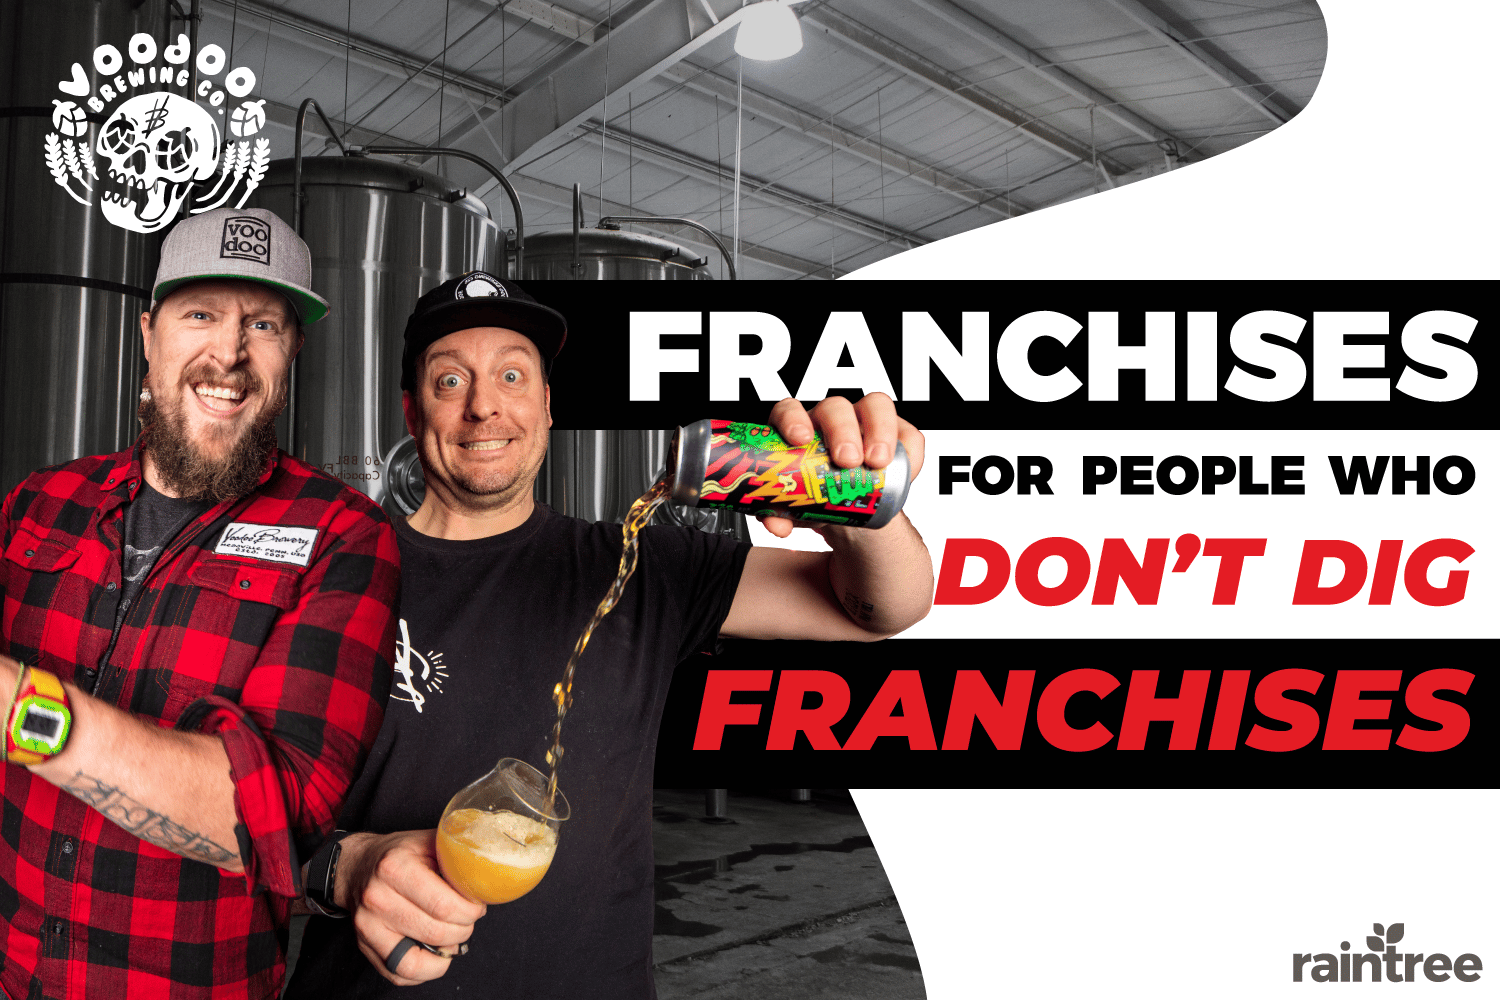 Matt and Jake of Voodoo Brewing Co 'Franchises for people who don't dig franchises'